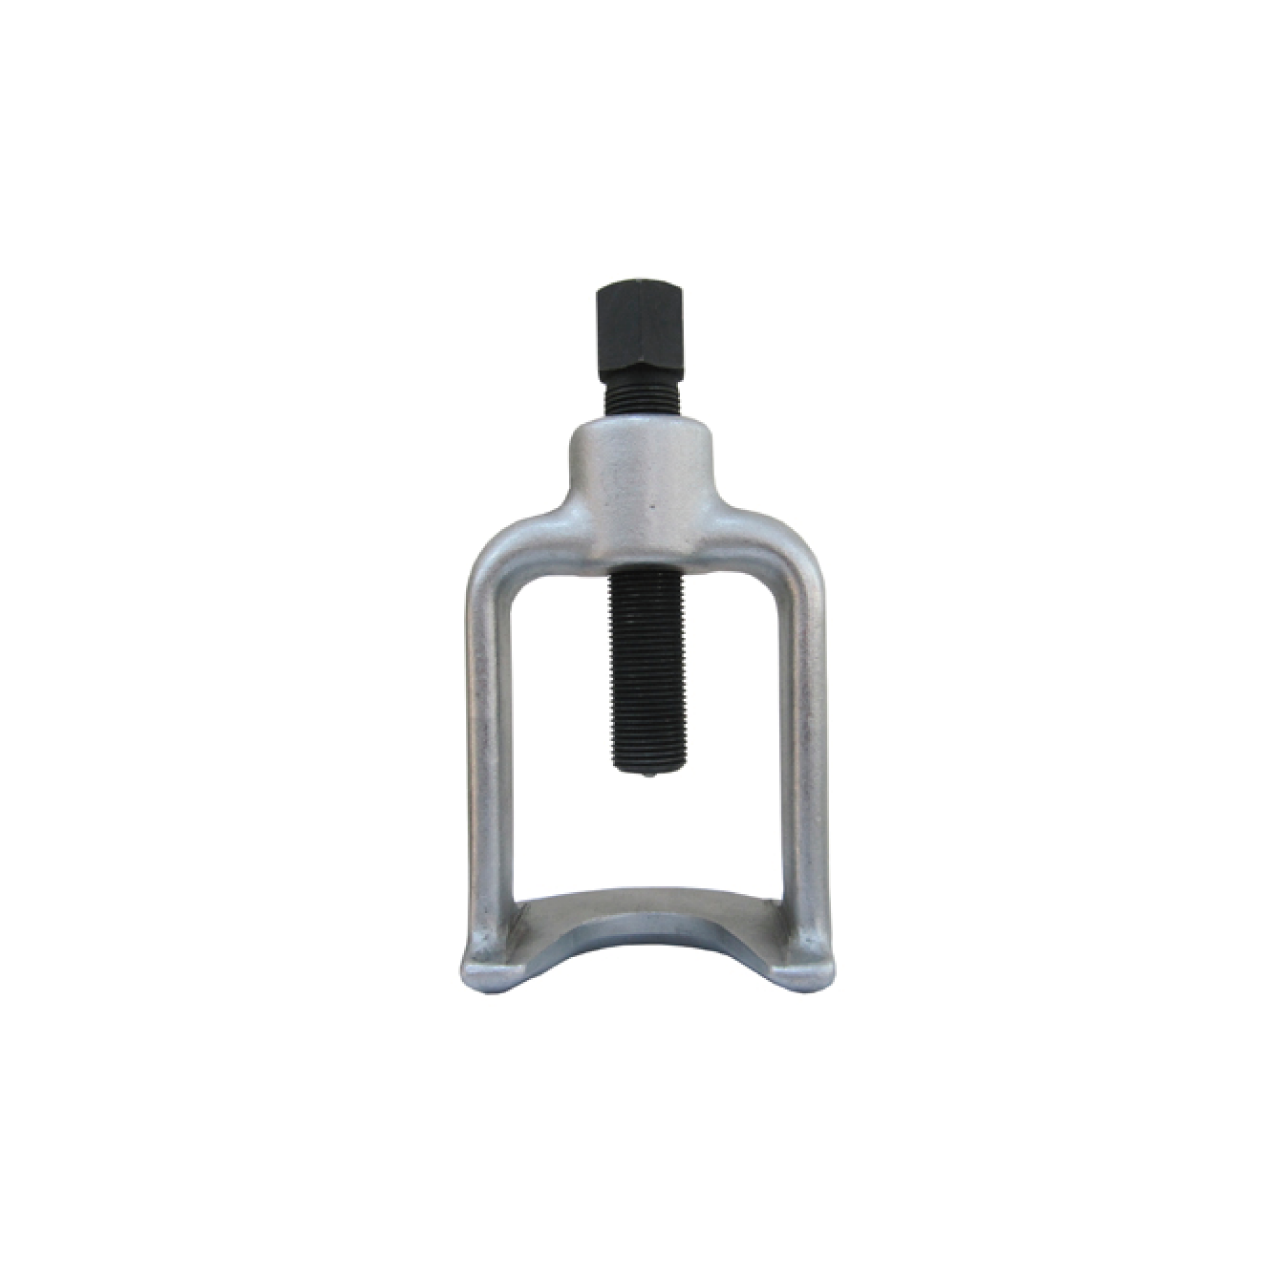 BALL JOINT SEPARATOR (46mm)